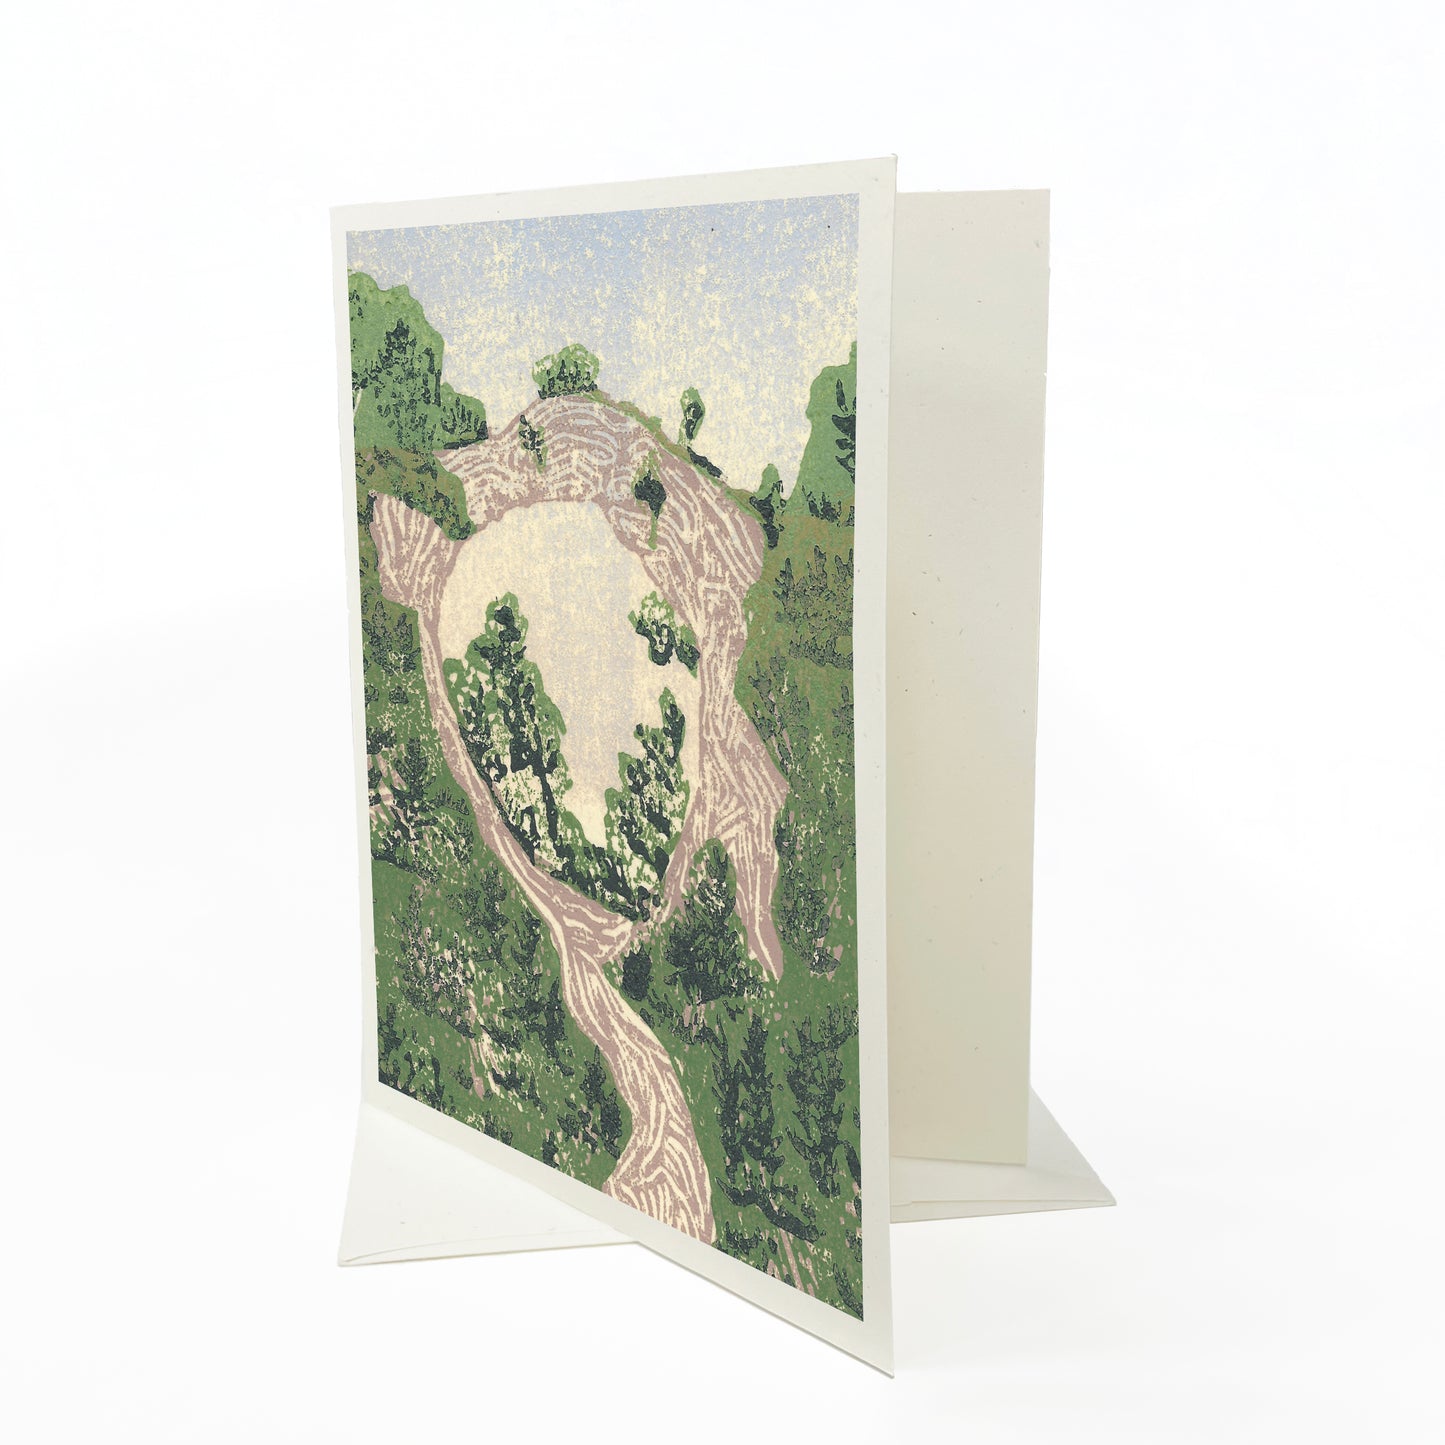 Arch Rock from Below #2 Blank Greeting Card - A casually elegant card featuring Mackinac Island art by printmaker Natalia Wohletz of Peninsula Prints.